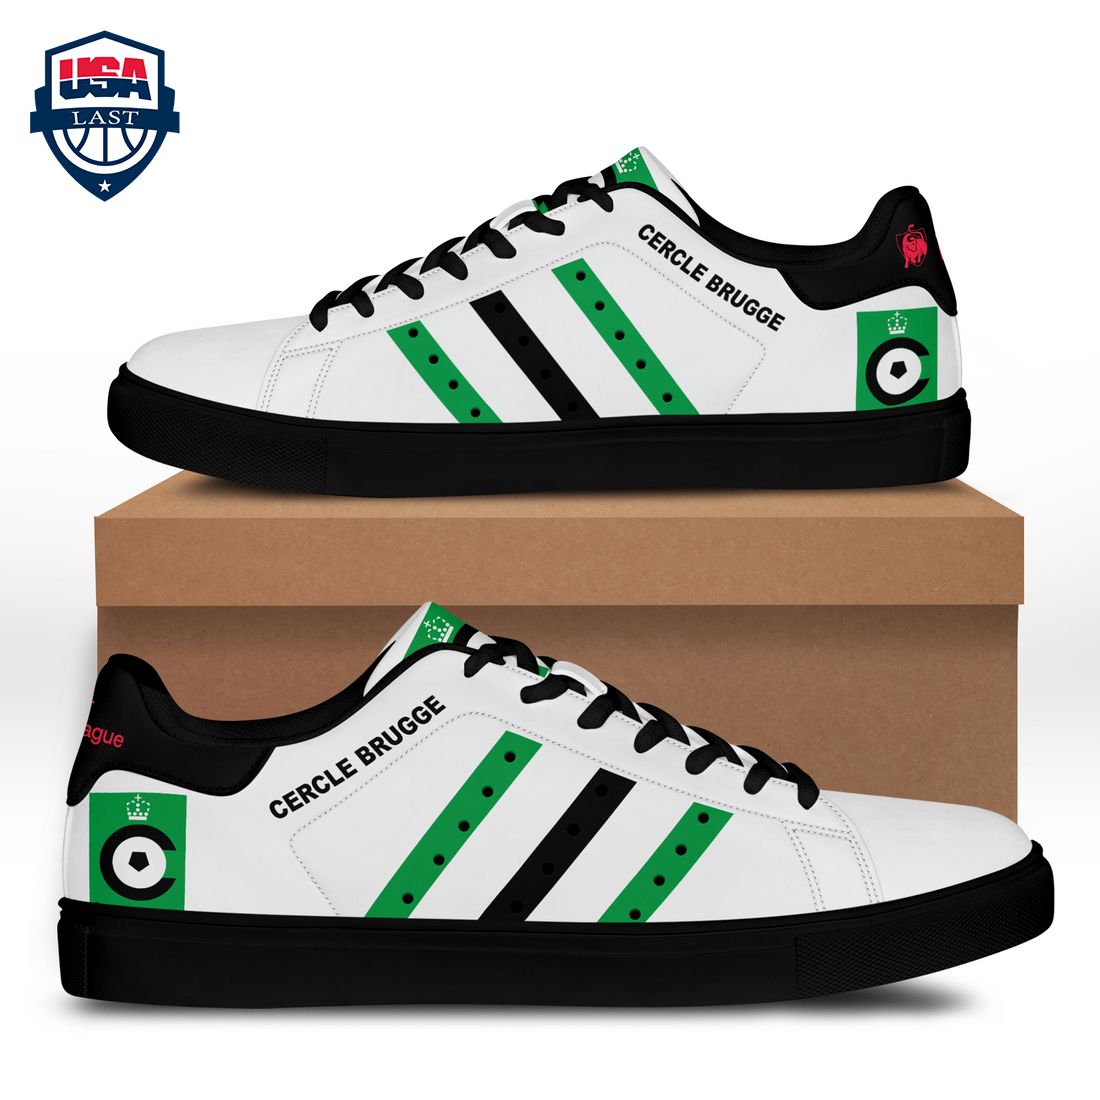 cercle-brugge-k-s-v-green-black-stripes-style-2-stan-smith-low-top-shoes-1-BLKDd.jpg